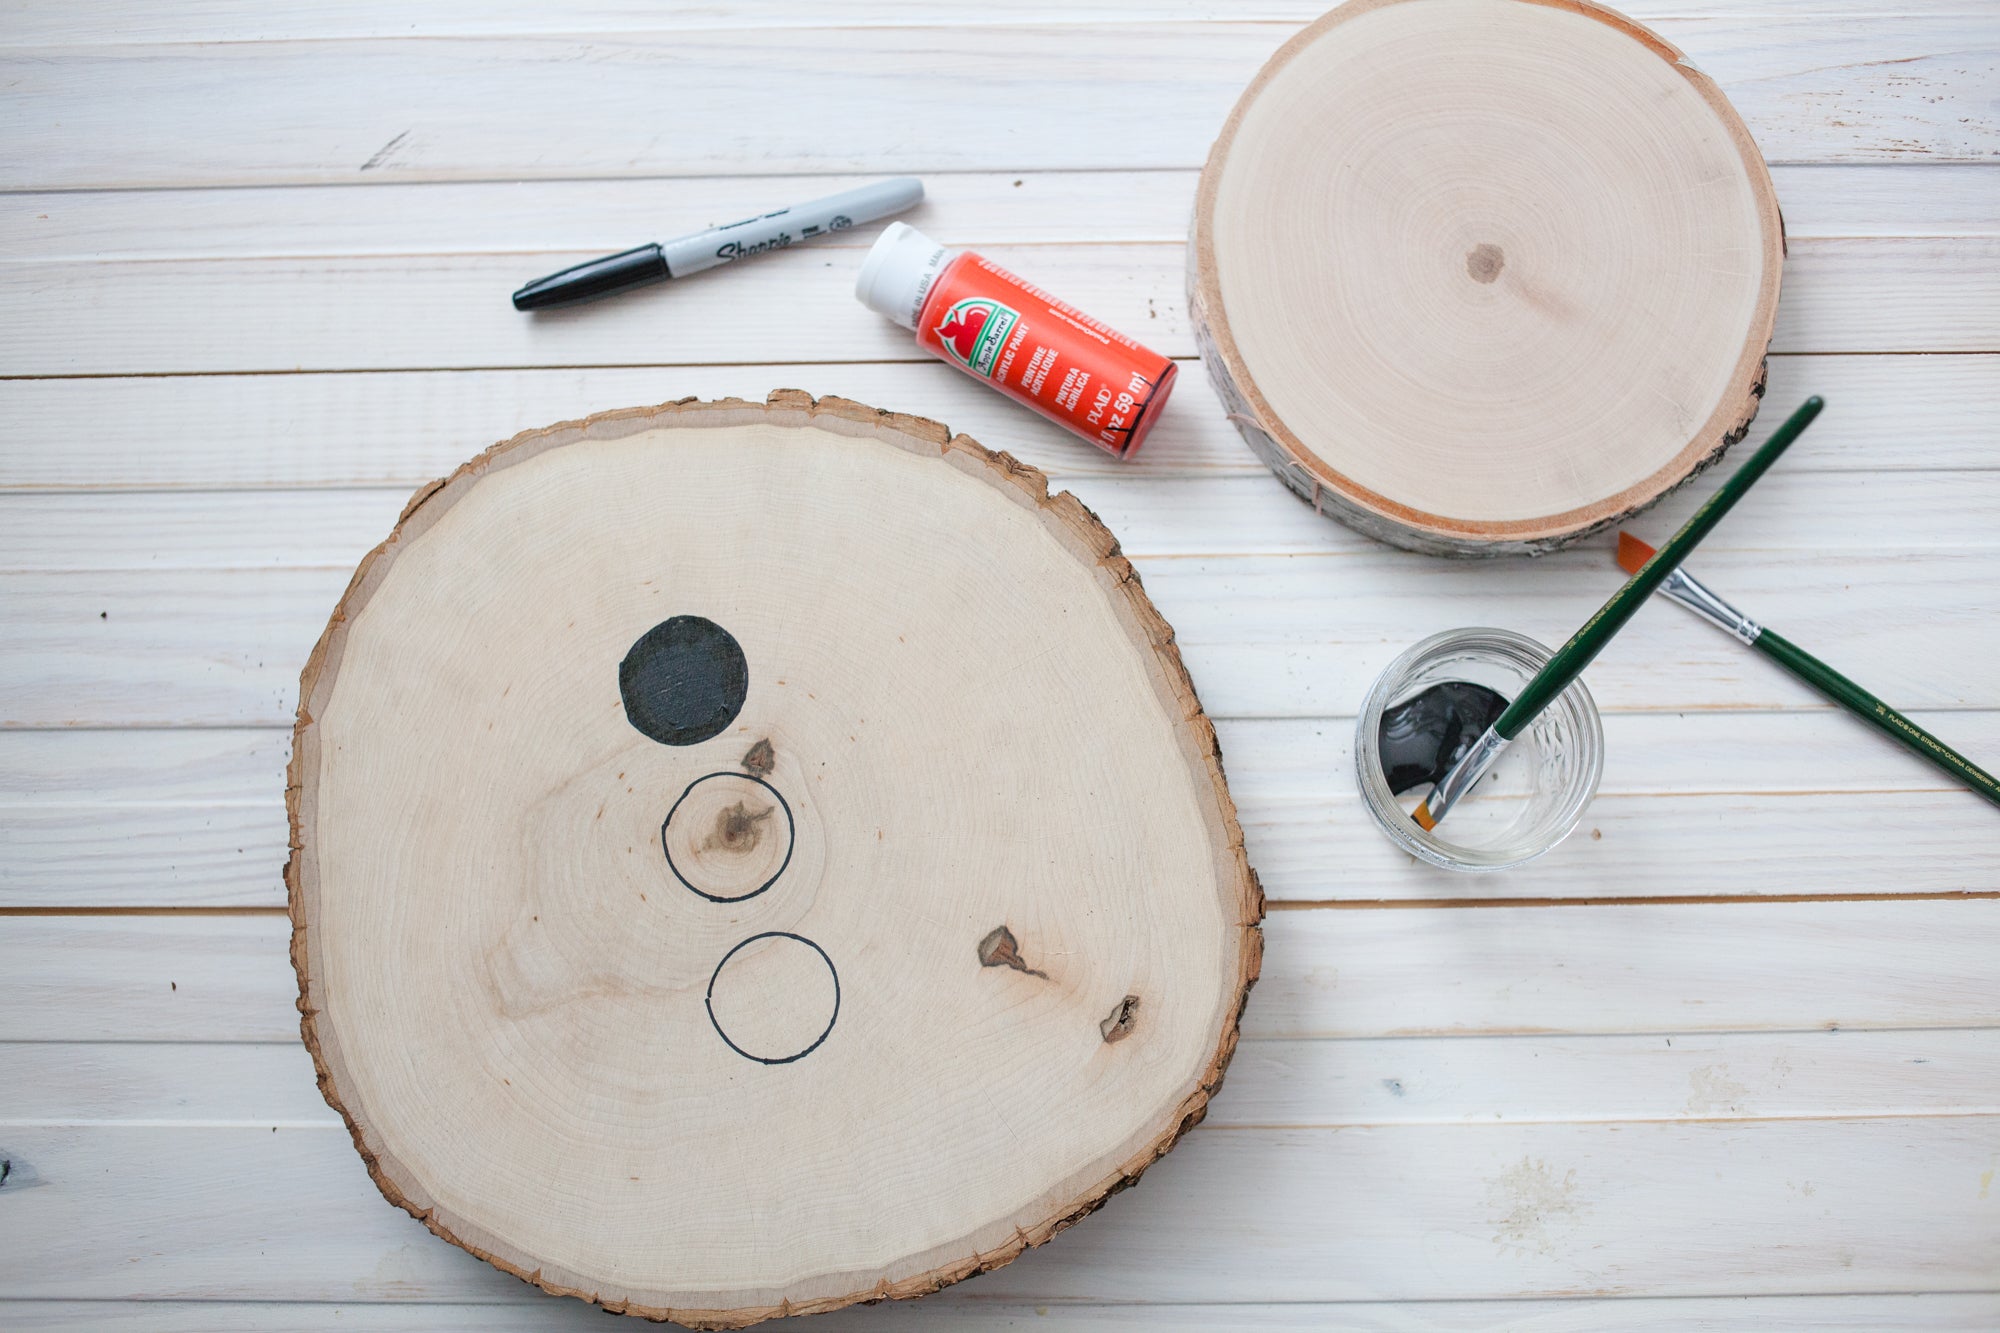 How to make a DIY snowman with wood rounds